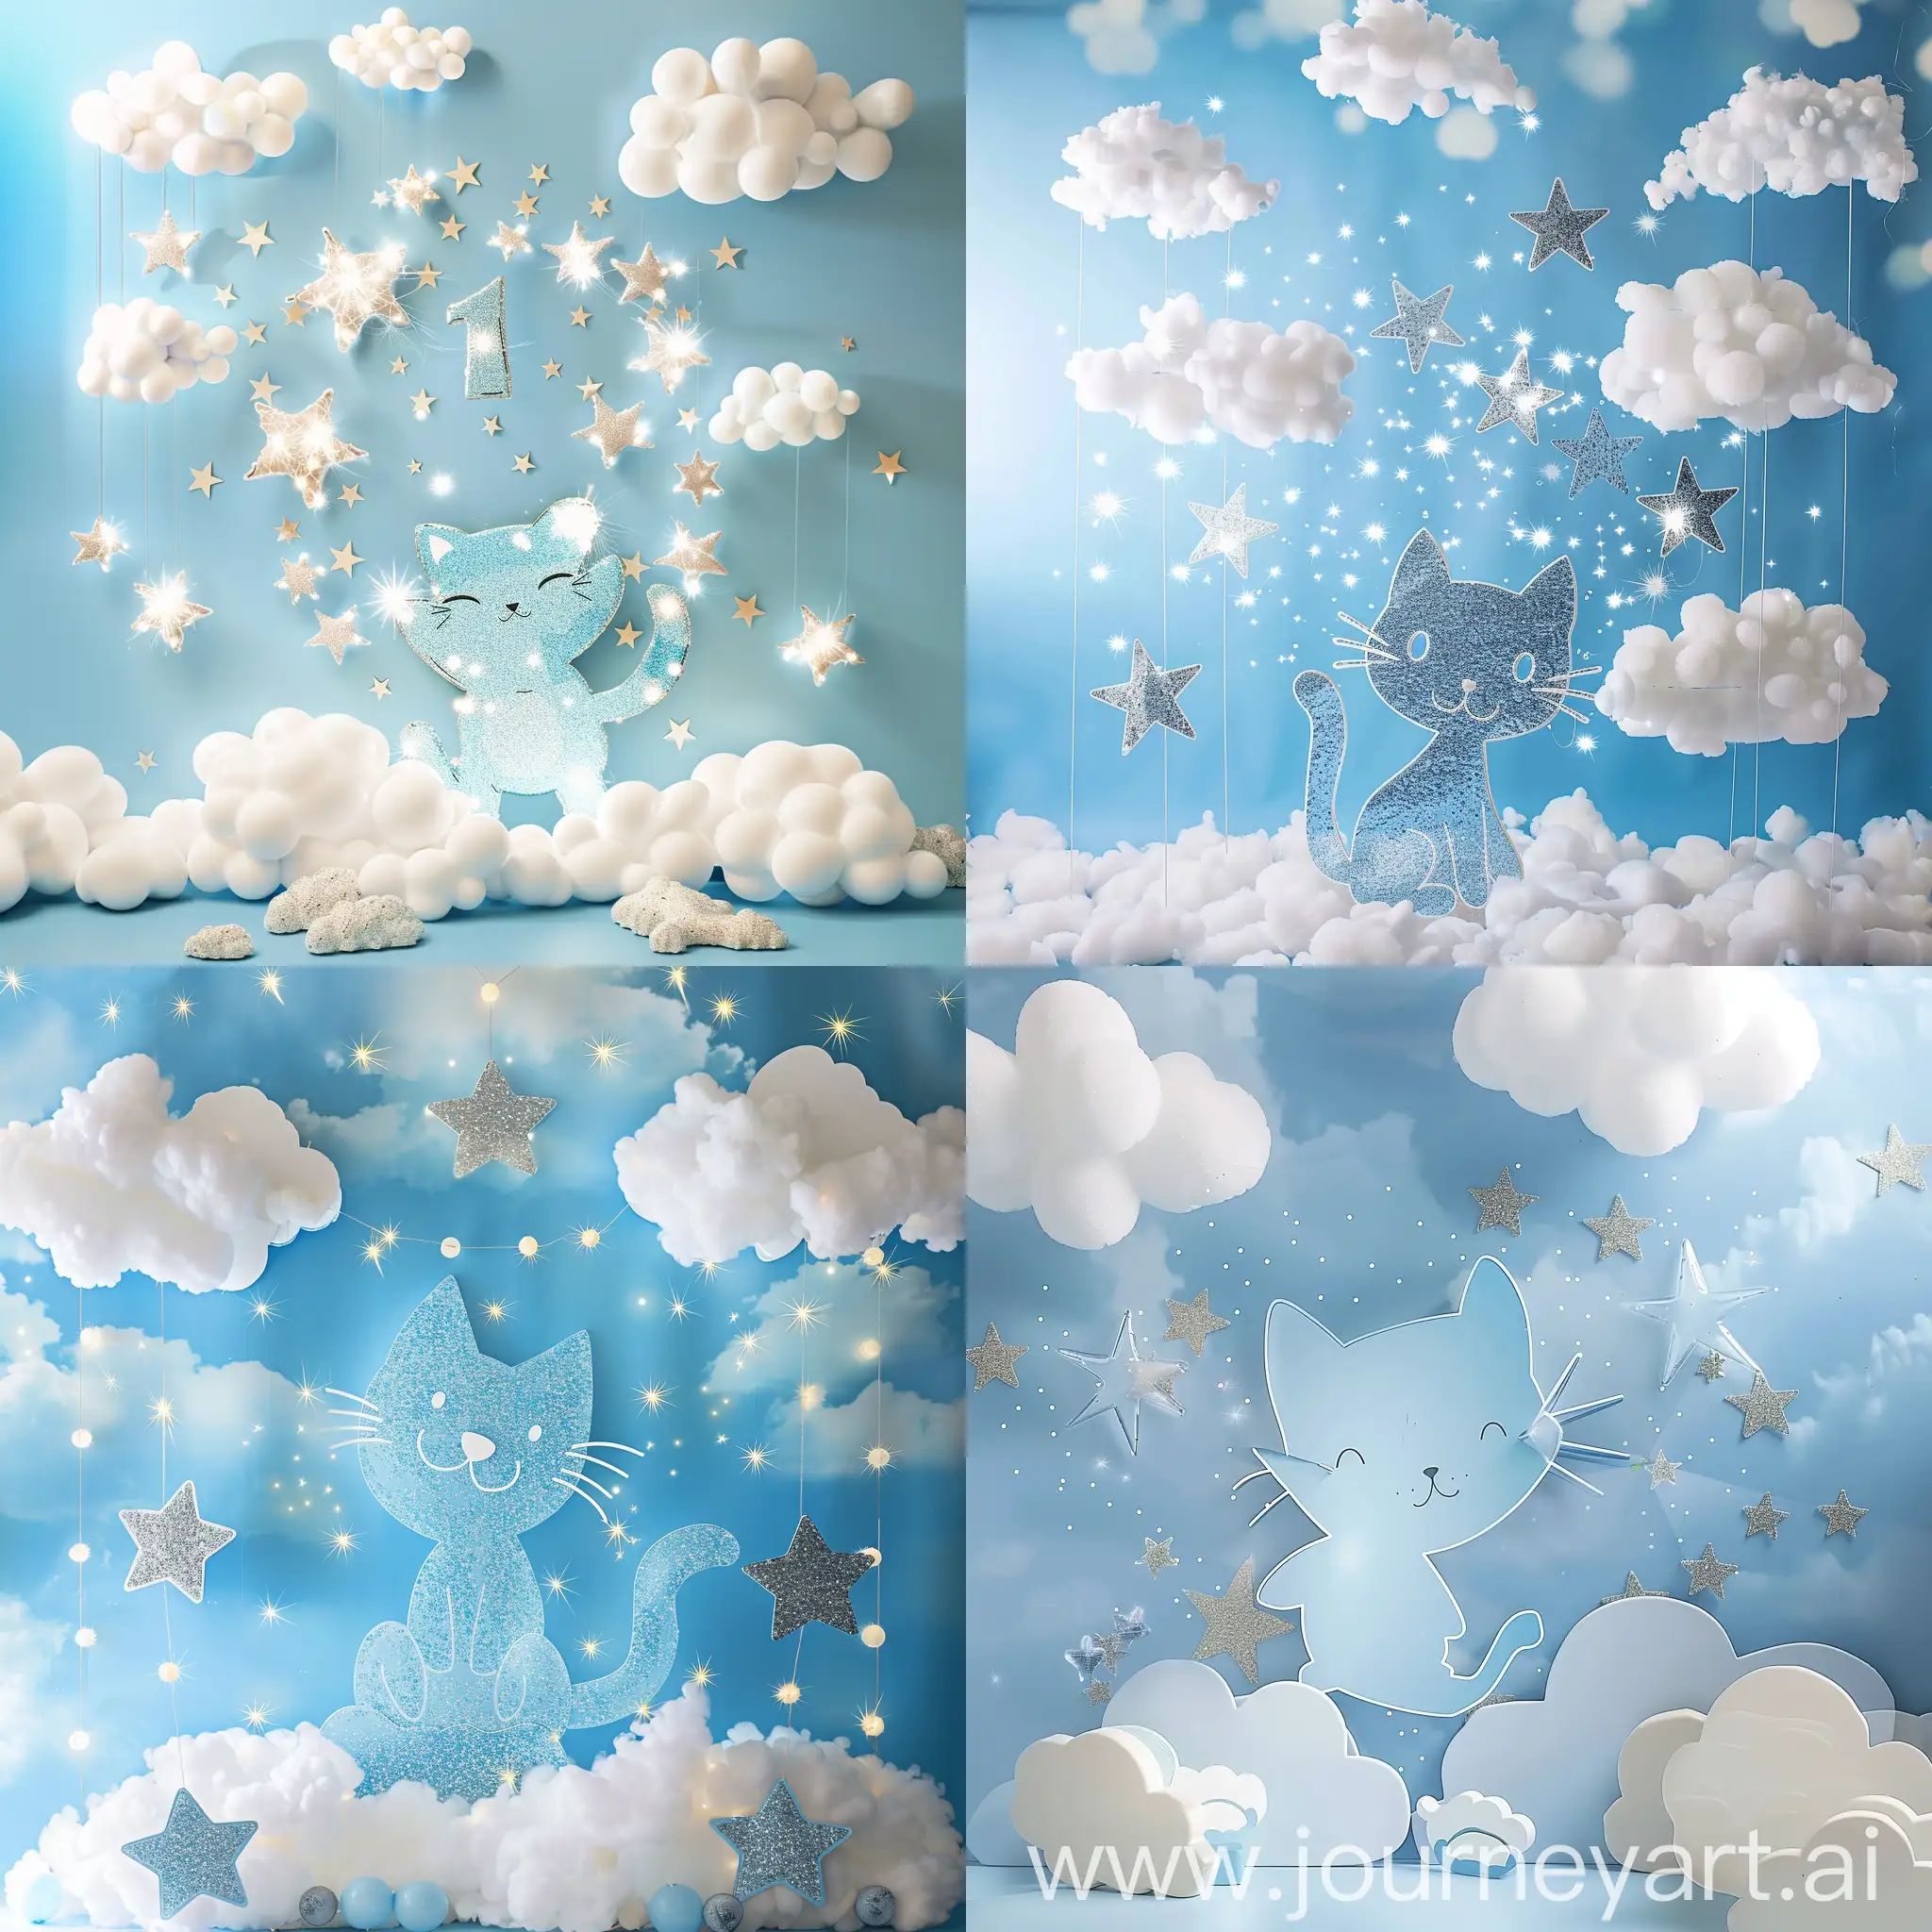 Bright-Blue-and-White-Birthday-Backdrop-with-Cartoon-Cat-Stars